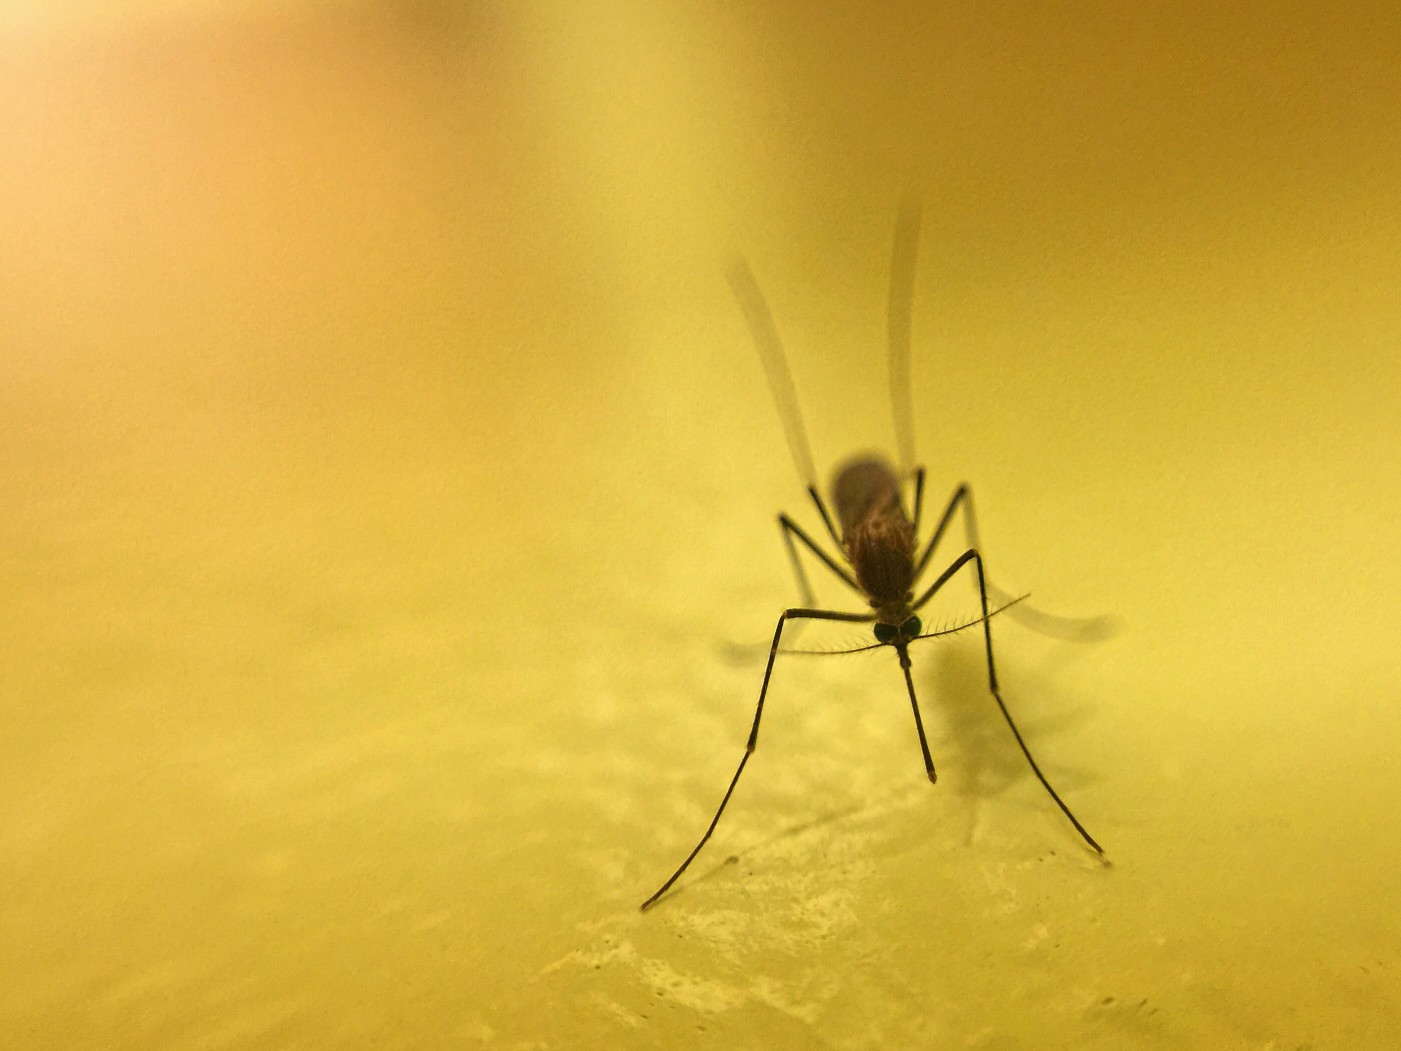 mosquito on a yellow background